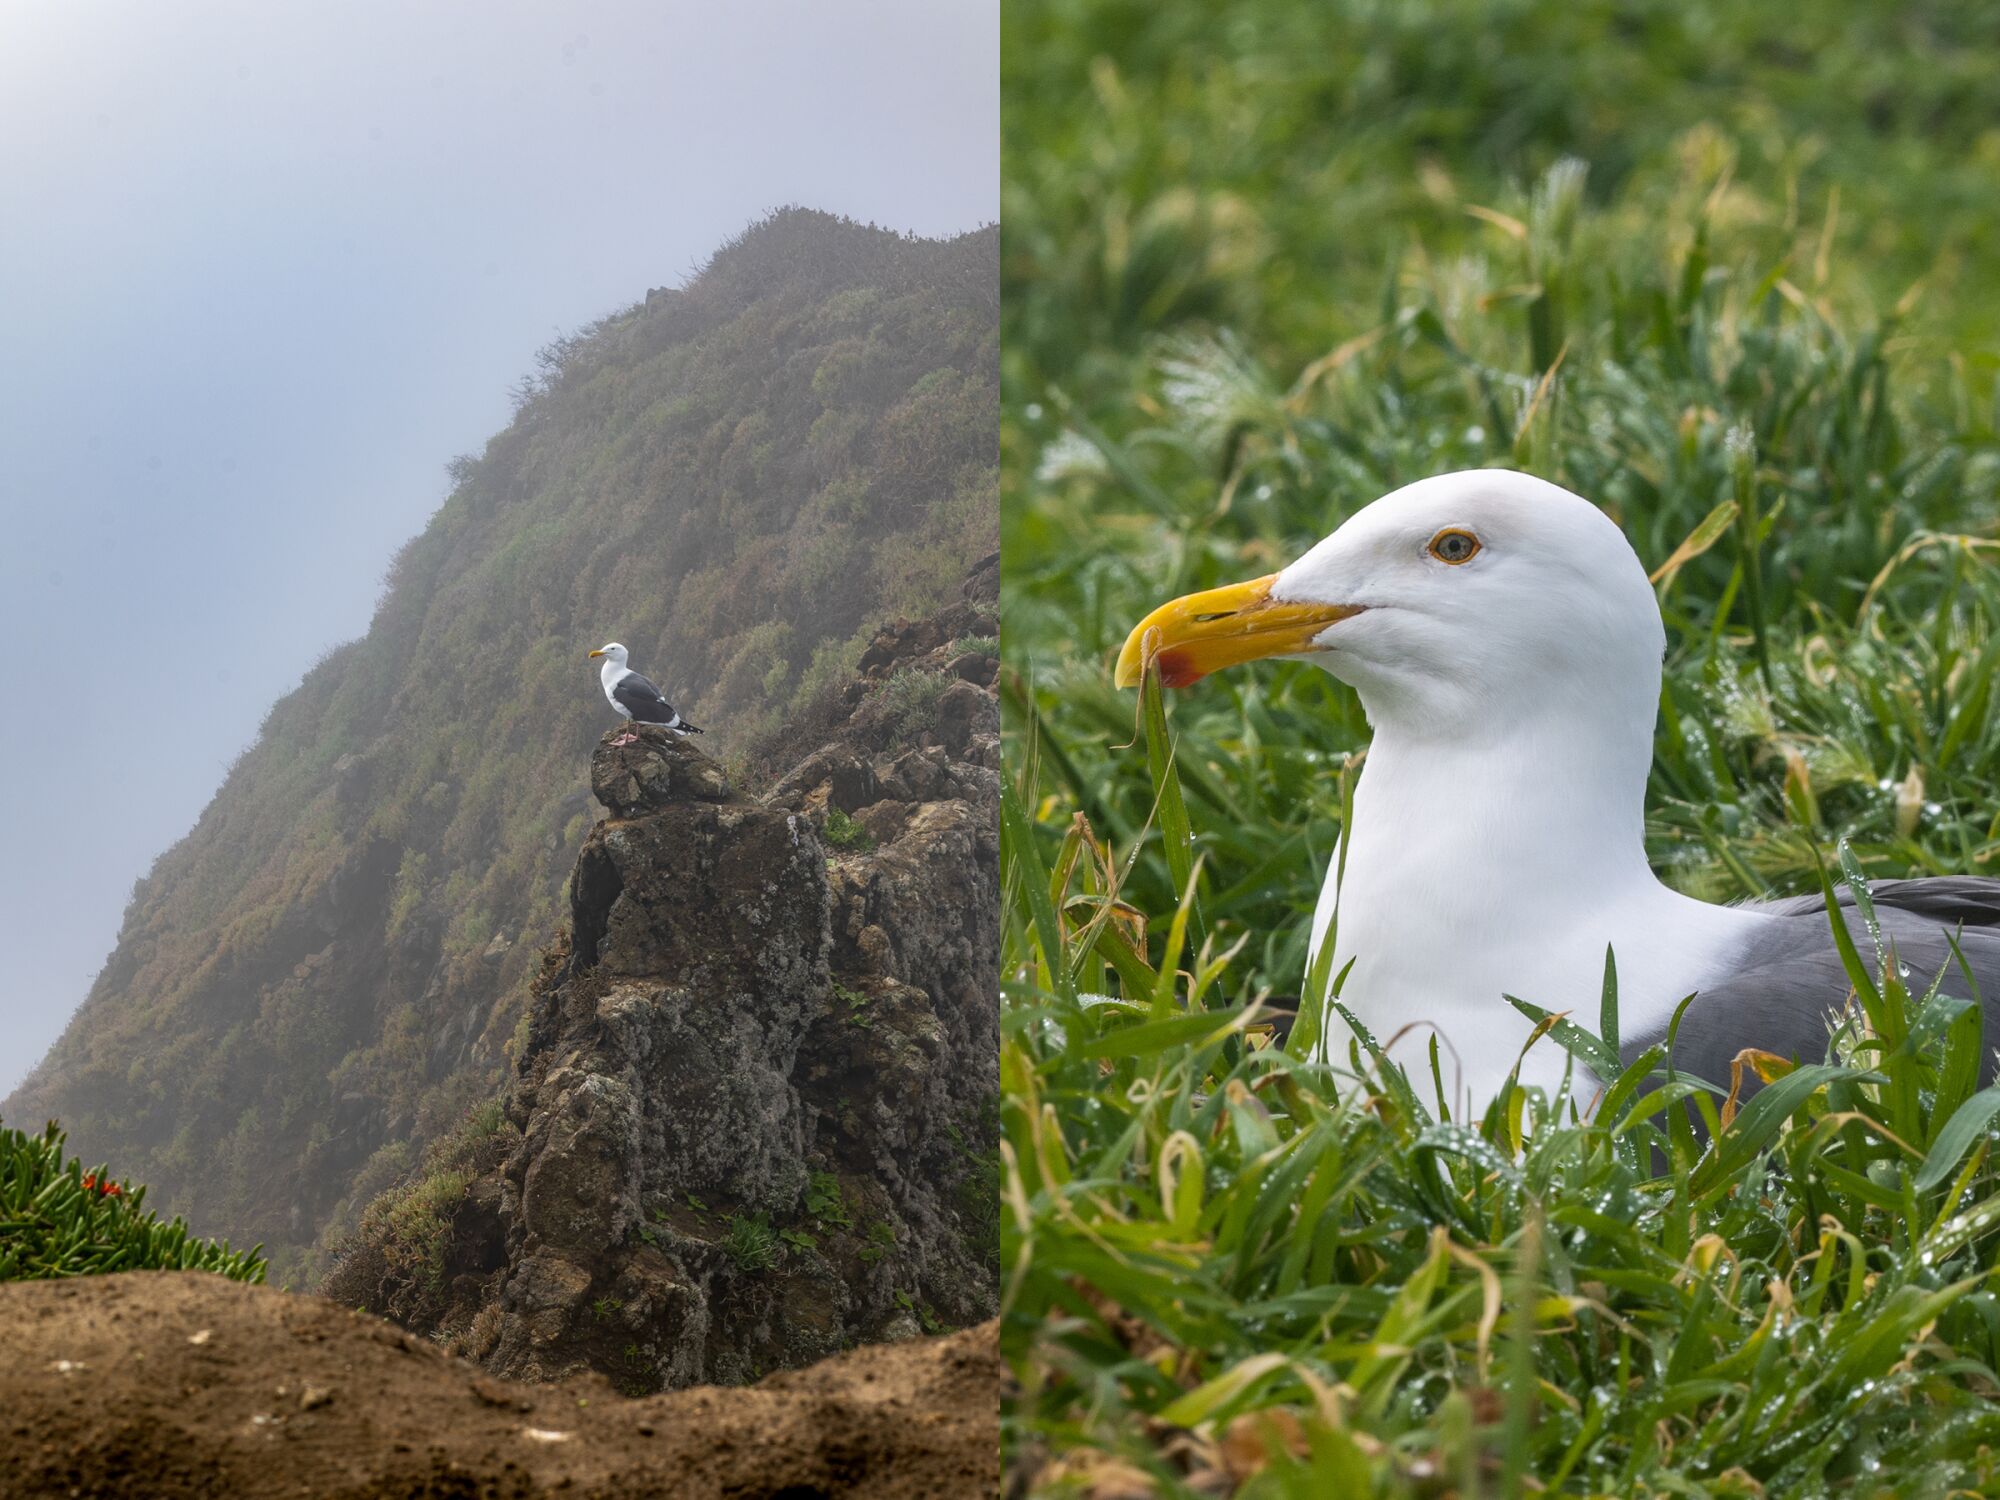 Two photos side by side, one of a seagull perched on a mountainside, and the other seagull sitting in grass.